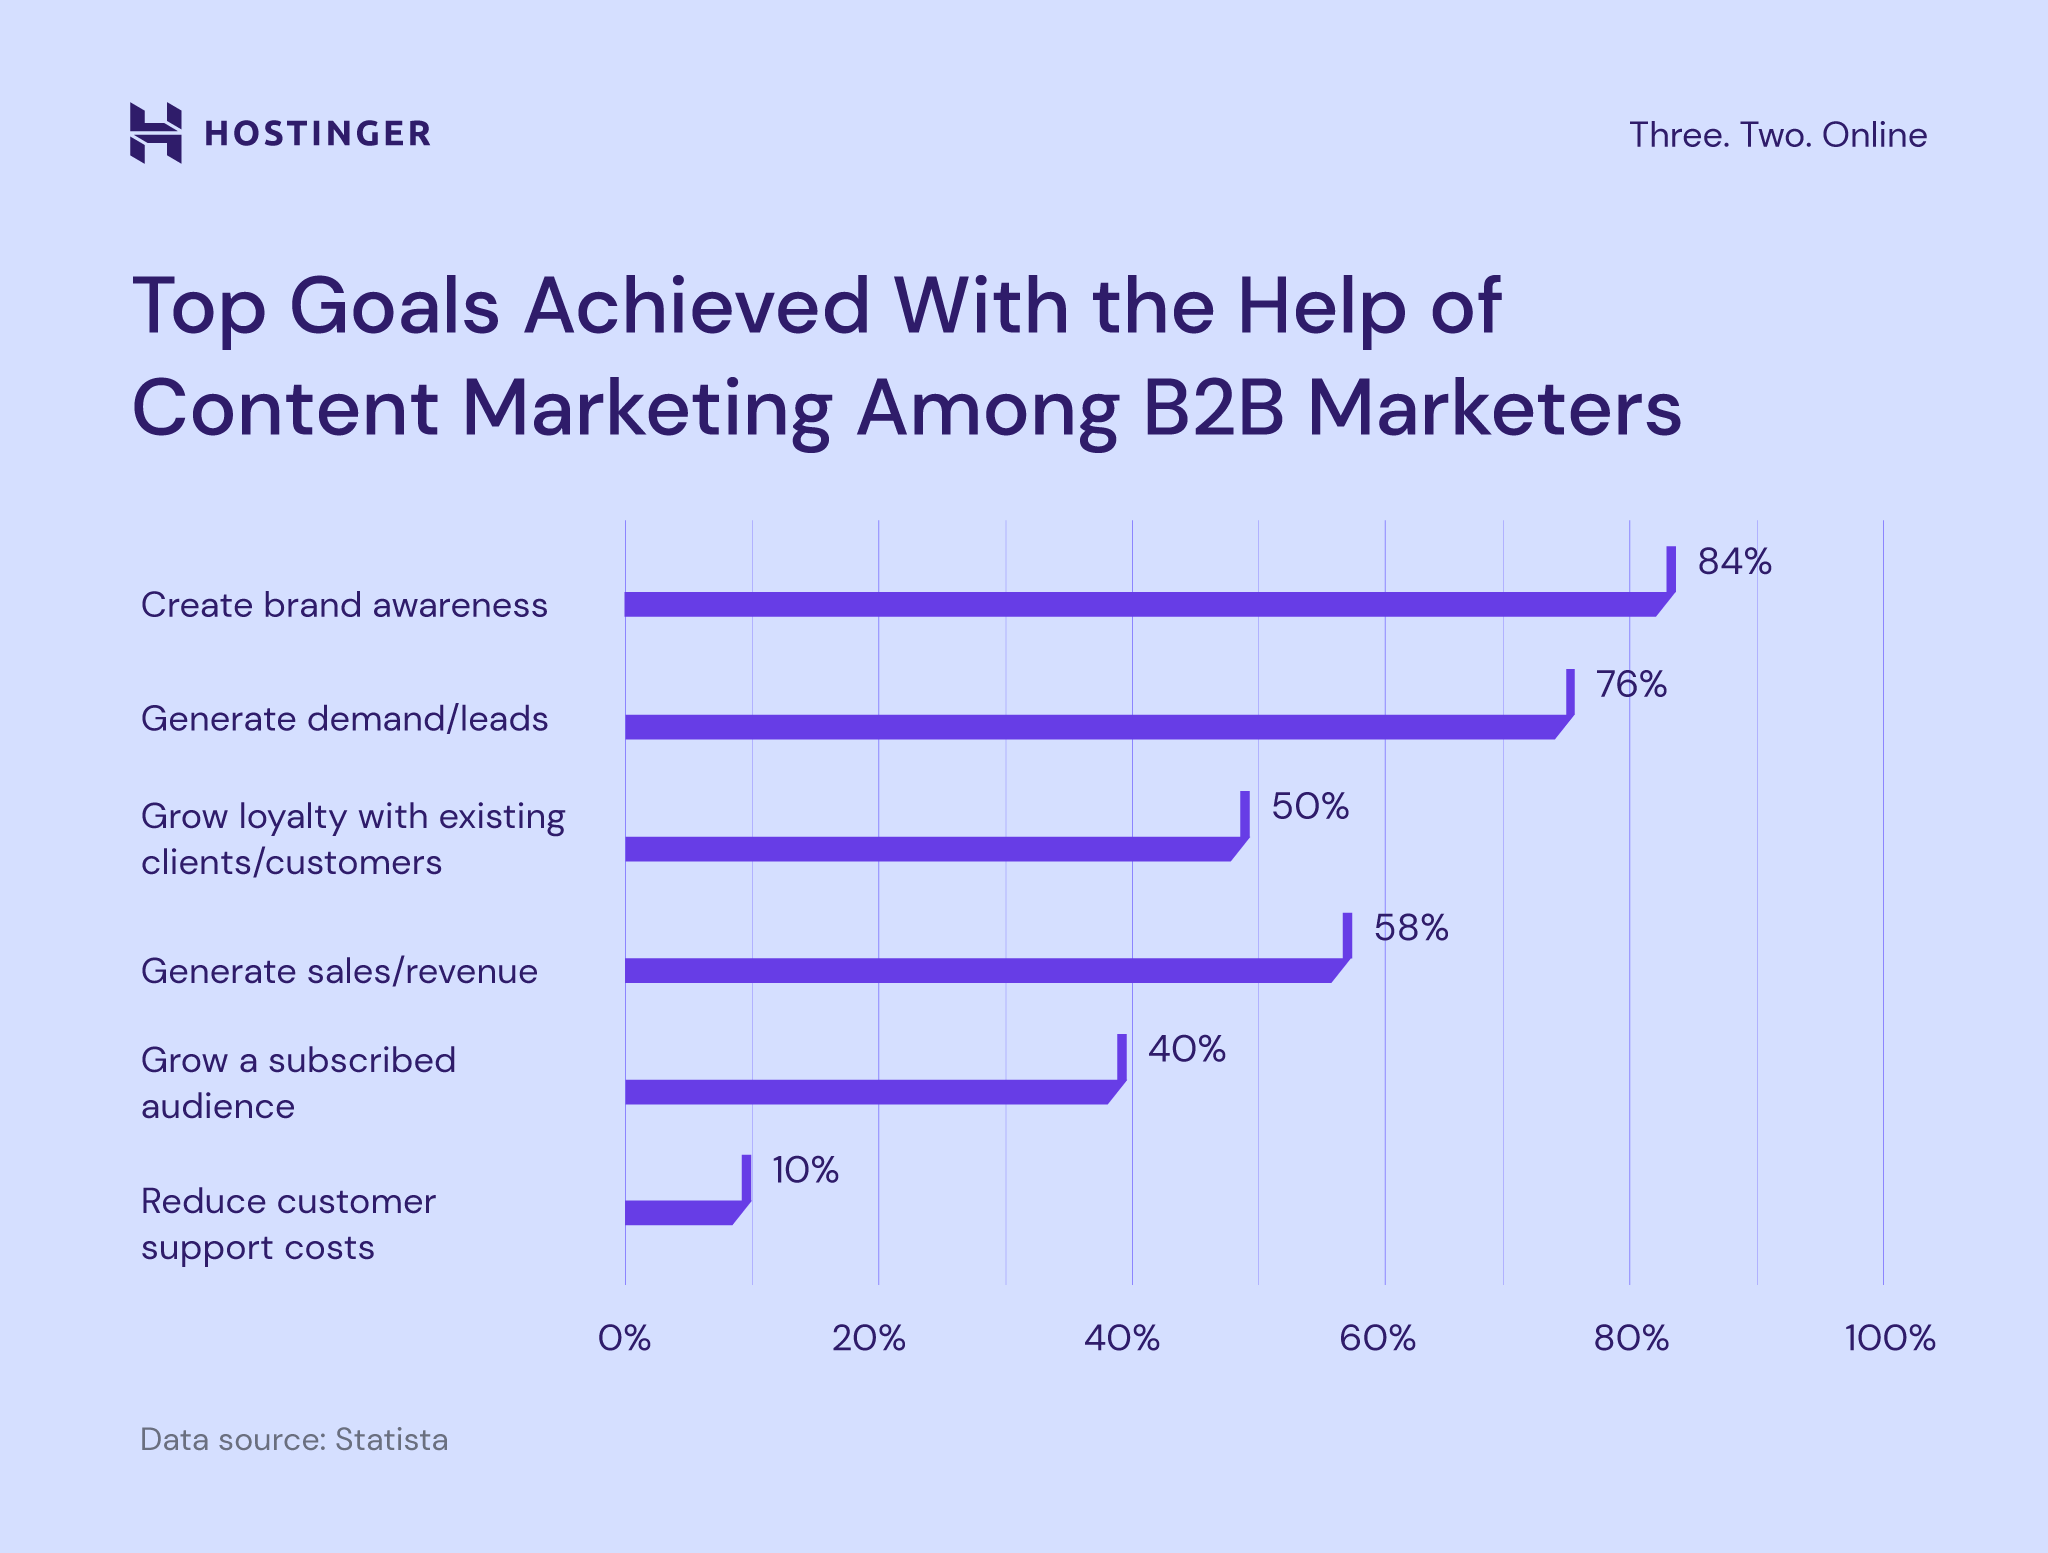 Top goals achieved with the help of content marketing
